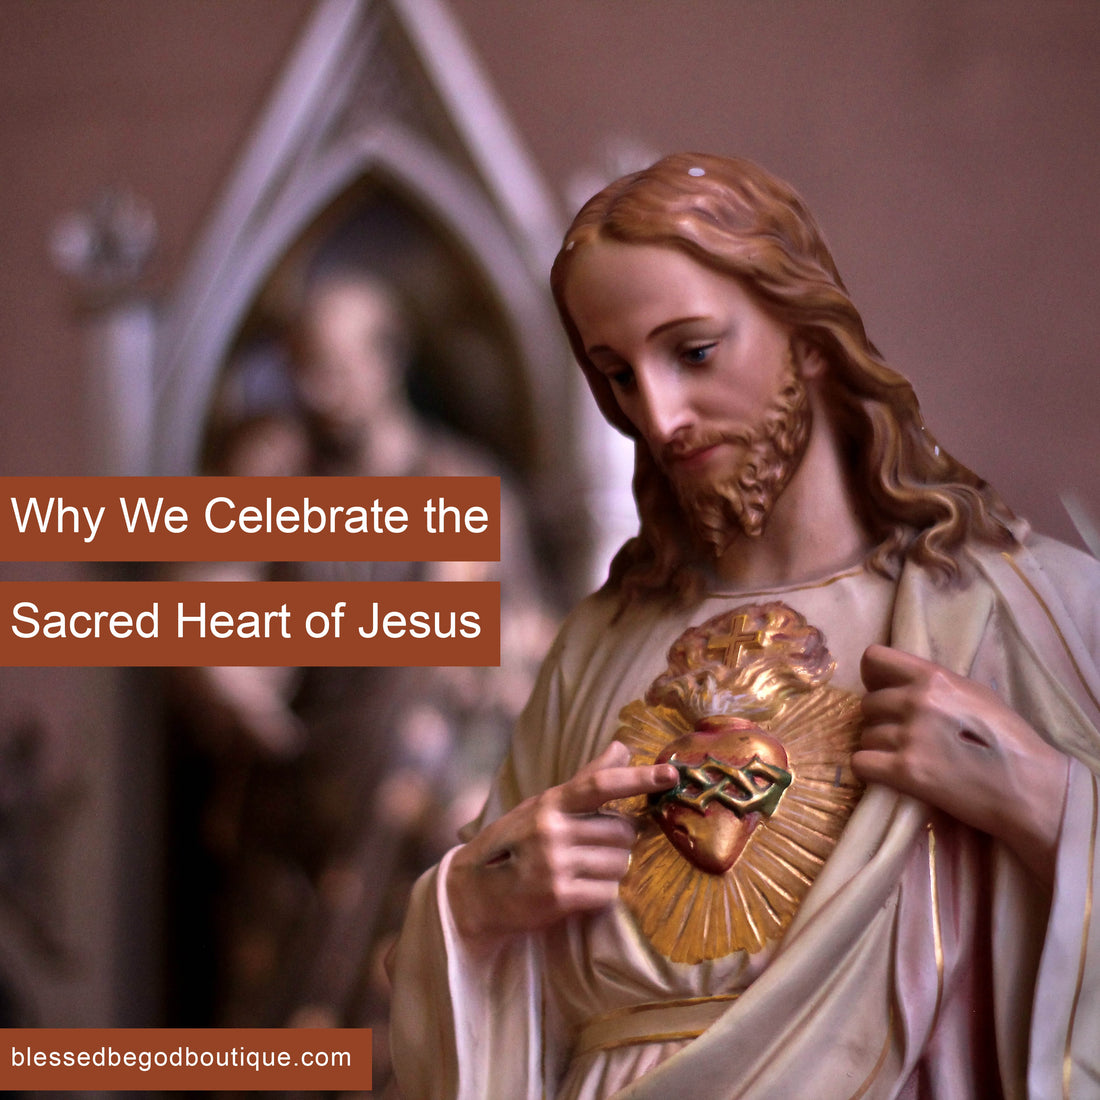 Why We Celebrate the Sacred Heart of Jesus